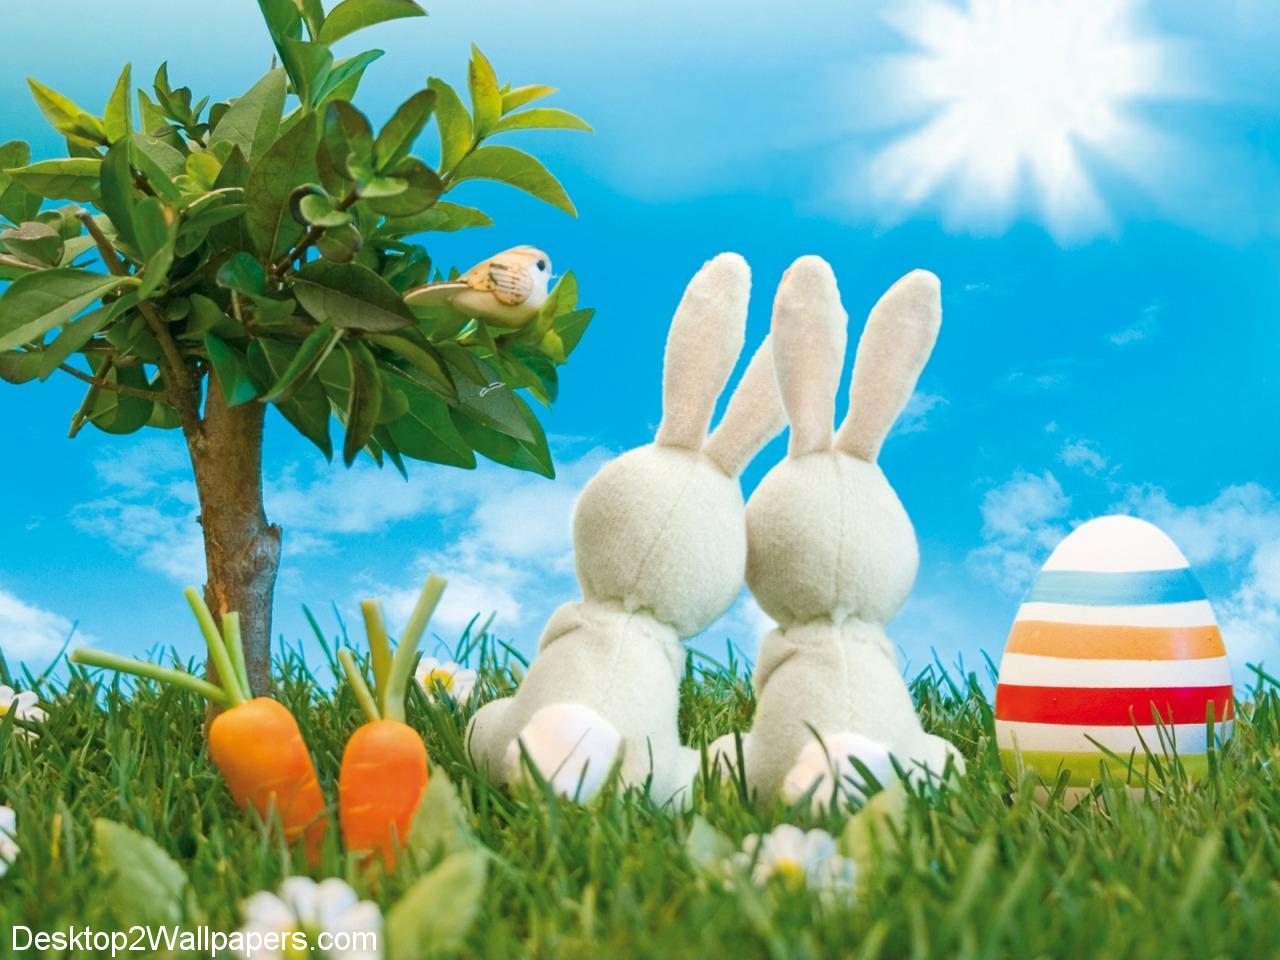 Easter Wallpaper Screensavers Closed For Holidays